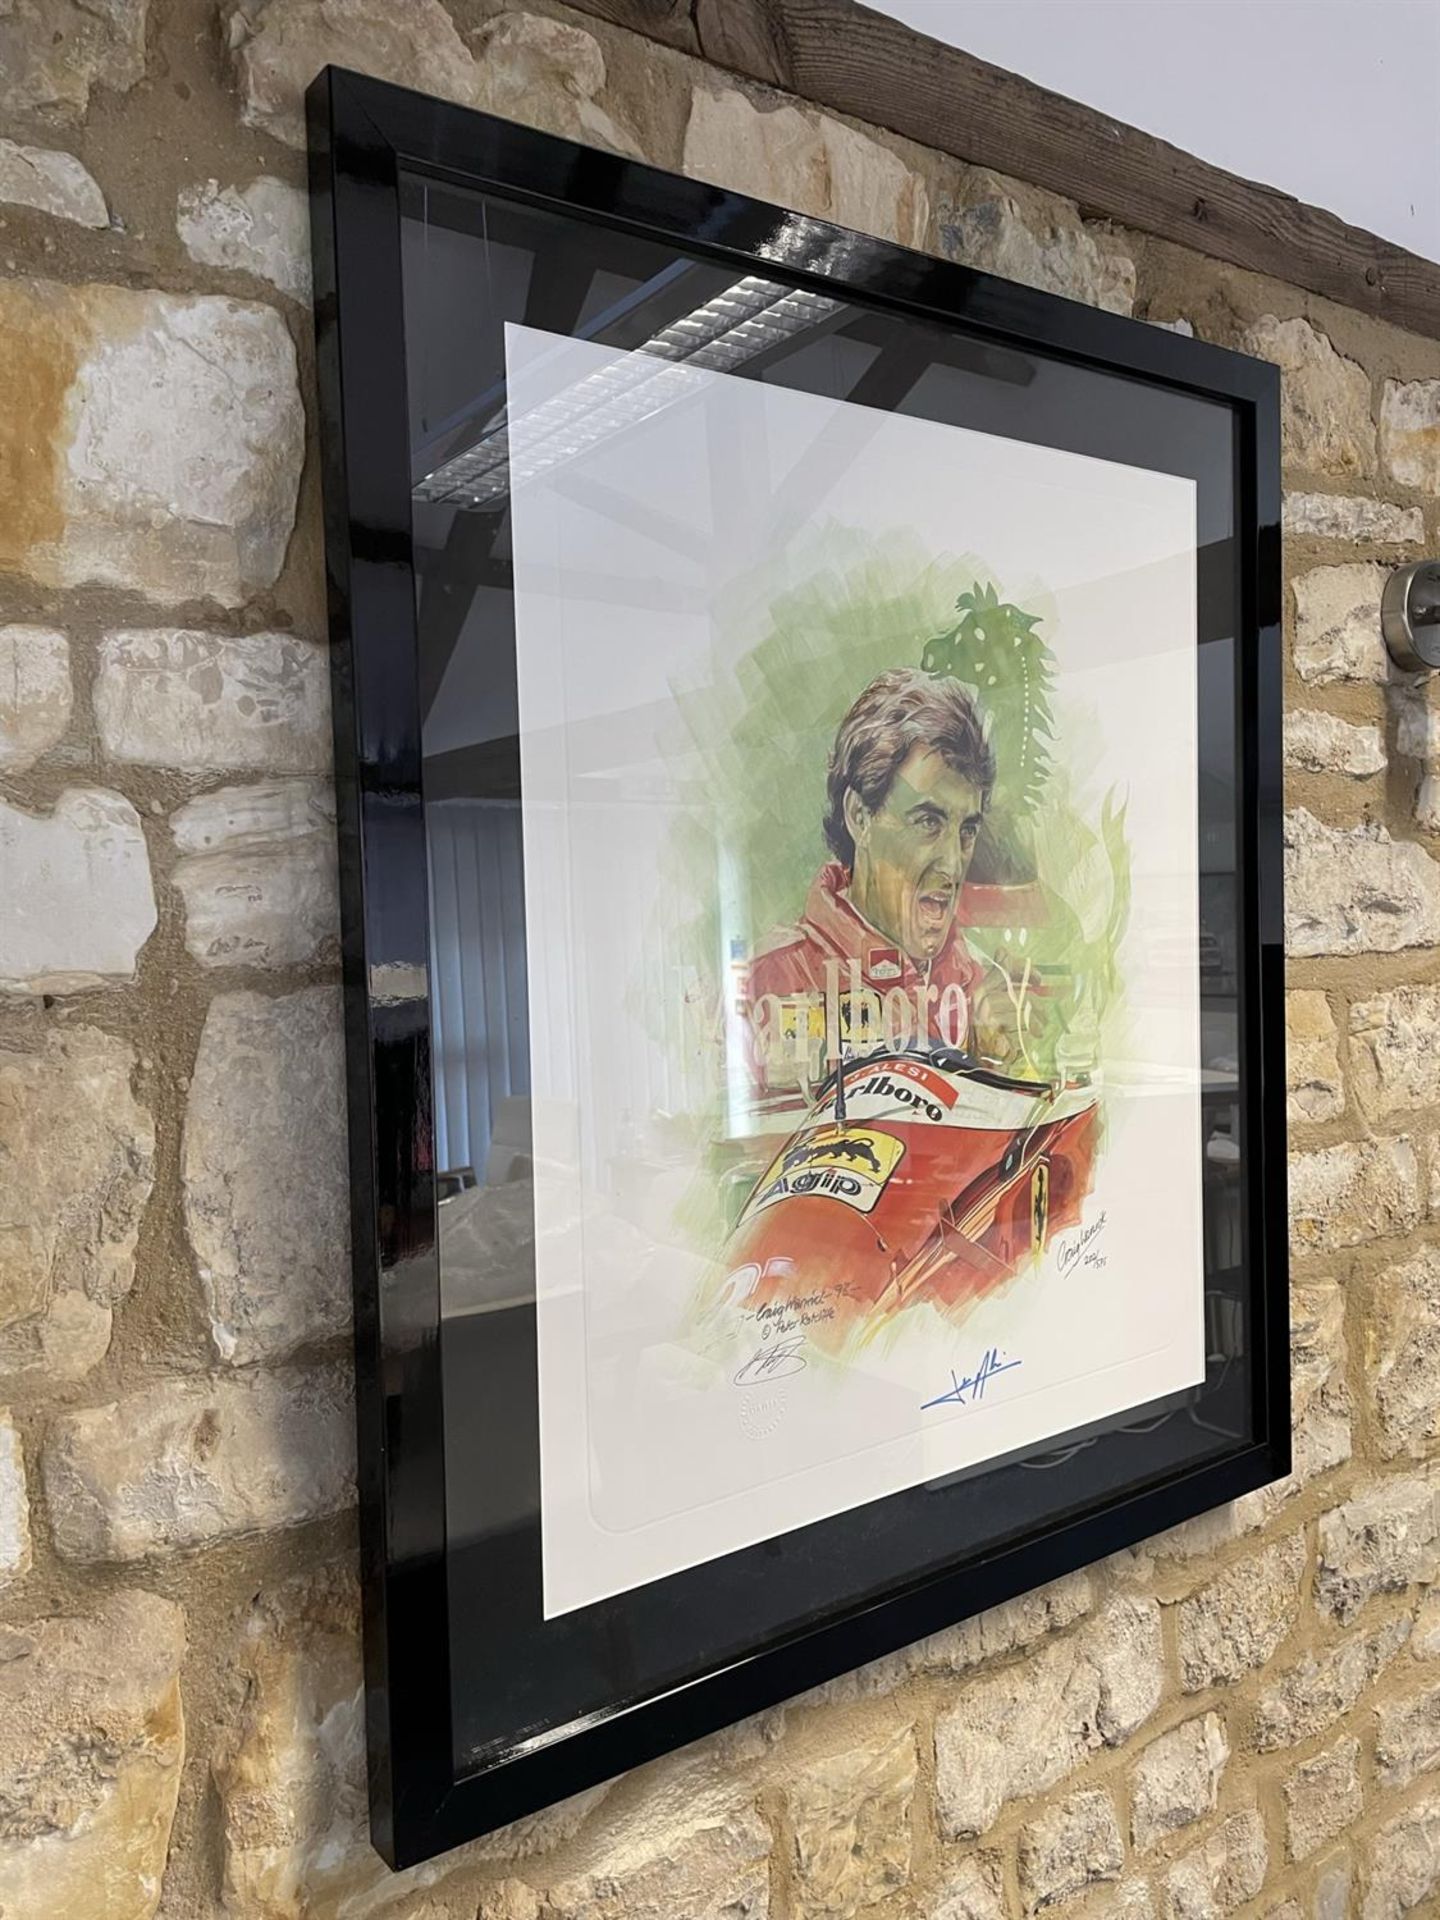 Jean Alesi Framed and Signed Collage Print by Craig Warwick - Image 6 of 6